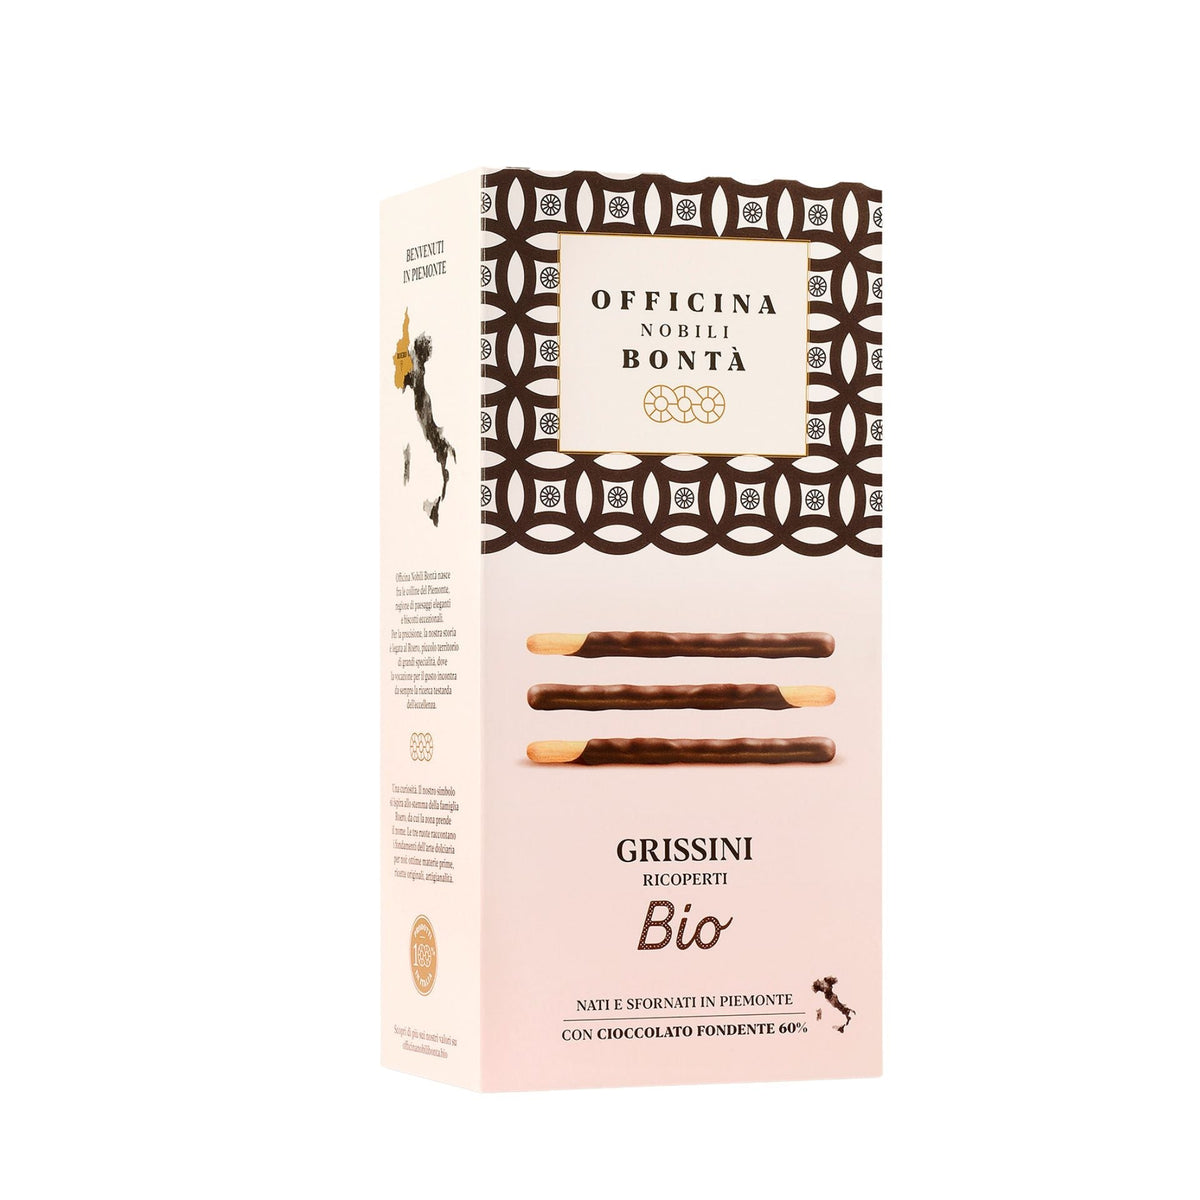 Officina Nobili Bonta Organic Chocolate Covered Breadstick Biscuit 150g (Box)  | Imported and distributed in the UK by Just Gourmet Foods